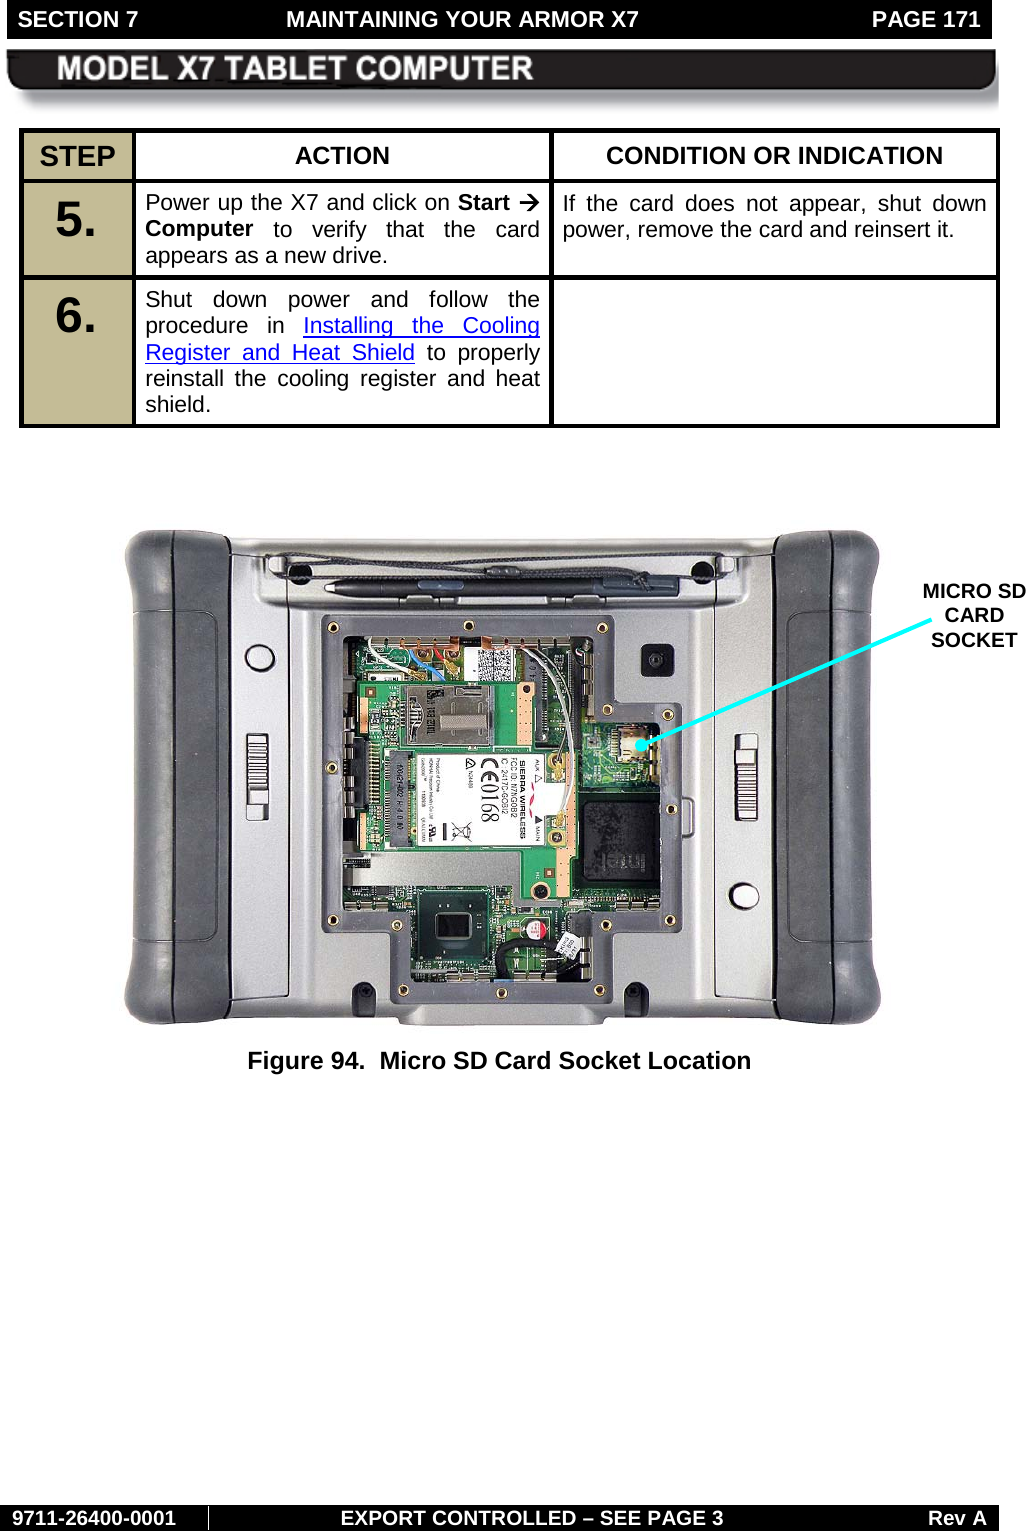 SECTION 7  MAINTAINING YOUR ARMOR X7  PAGE 171        9711-26400-0001 EXPORT CONTROLLED – SEE PAGE 3 Rev A STEP  ACTION CONDITION OR INDICATION 5.   Power up the X7 and click on Start à Computer to verify that the card appears as a new drive. If the card does not appear, shut down power, remove the card and reinsert it. 6.   Shut down power and follow the procedure in Installing the Cooling Register and Heat Shield to properly reinstall the cooling register and heat shield.      Figure 94.  Micro SD Card Socket Location   MICRO SD CARD SOCKET 